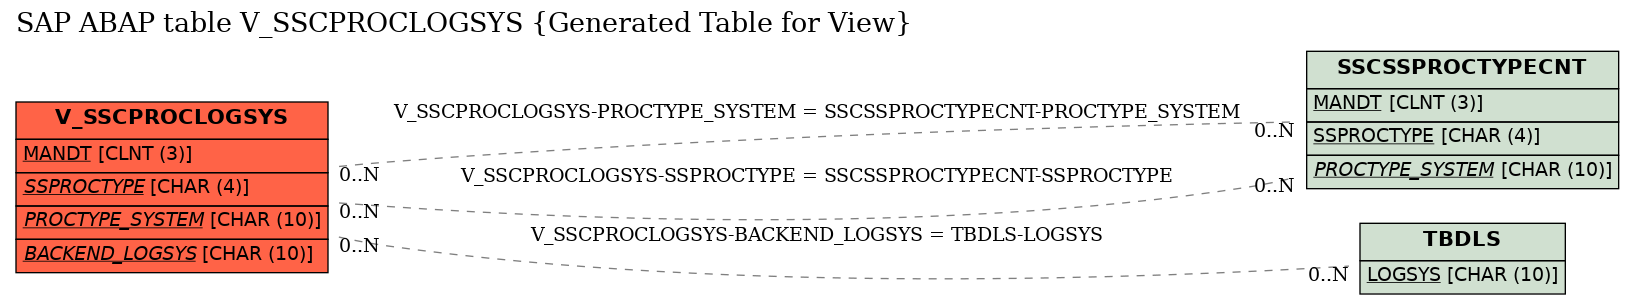 E-R Diagram for table V_SSCPROCLOGSYS (Generated Table for View)